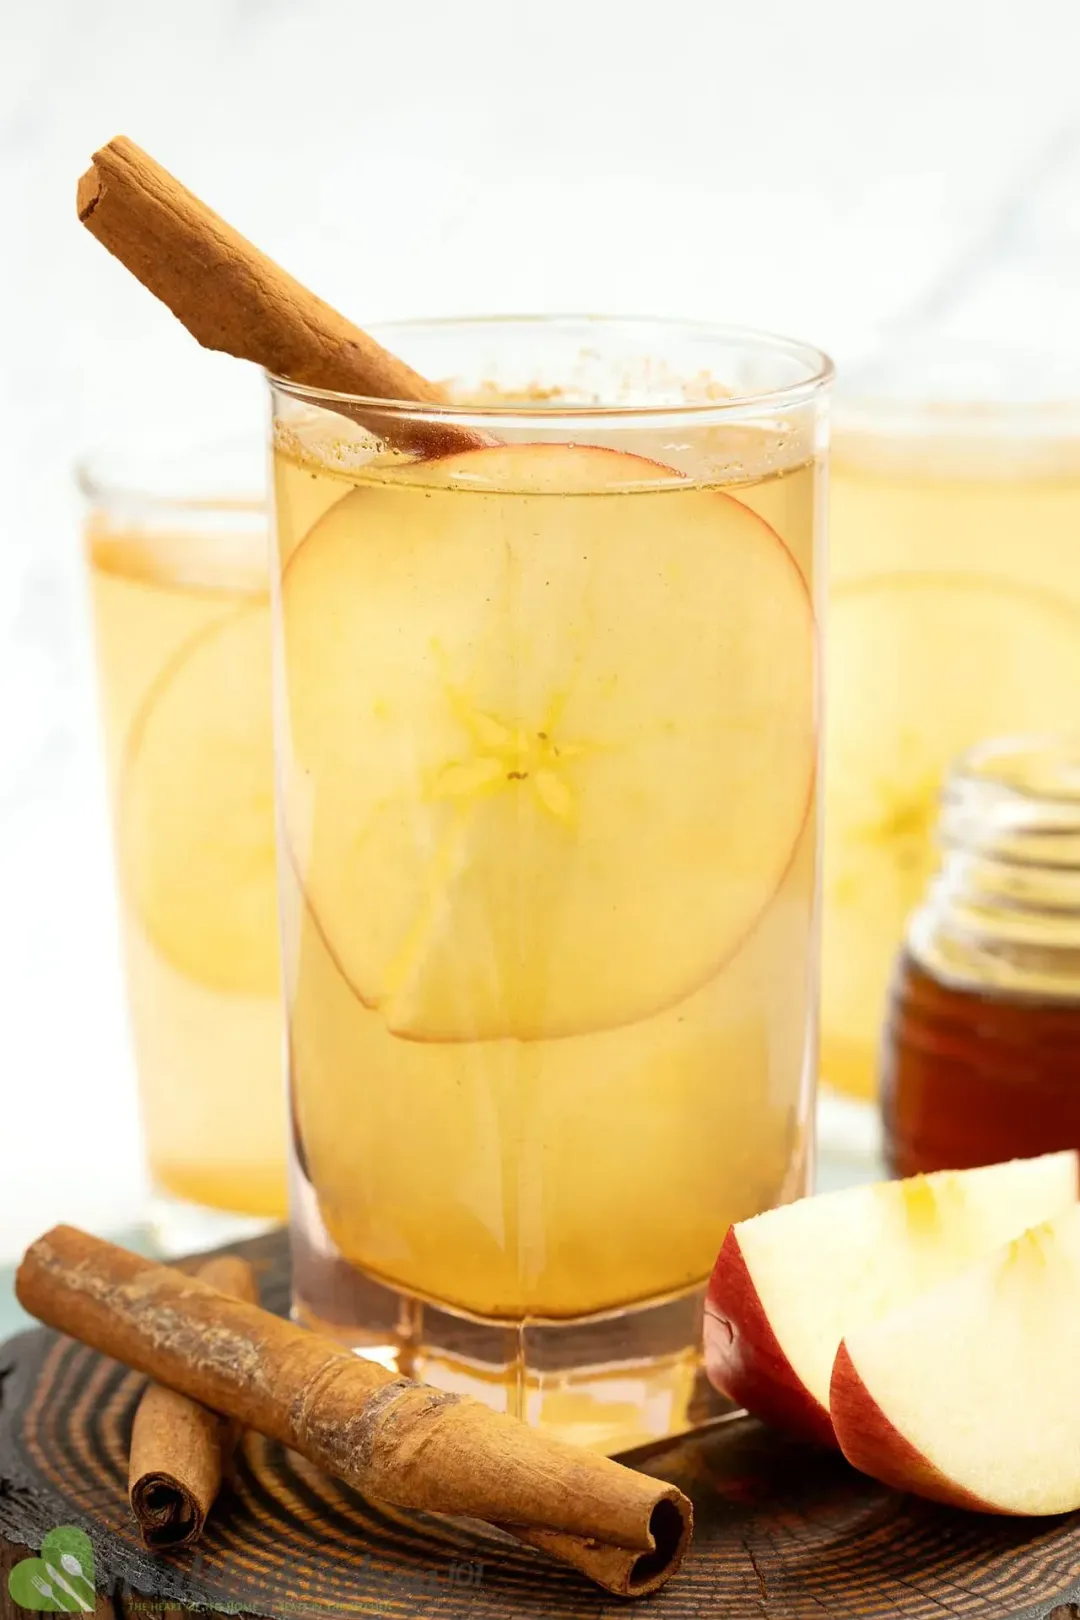 A shot glass of apple vinegar honey with cinnamon sticks, red apple wedges, and a honey jar